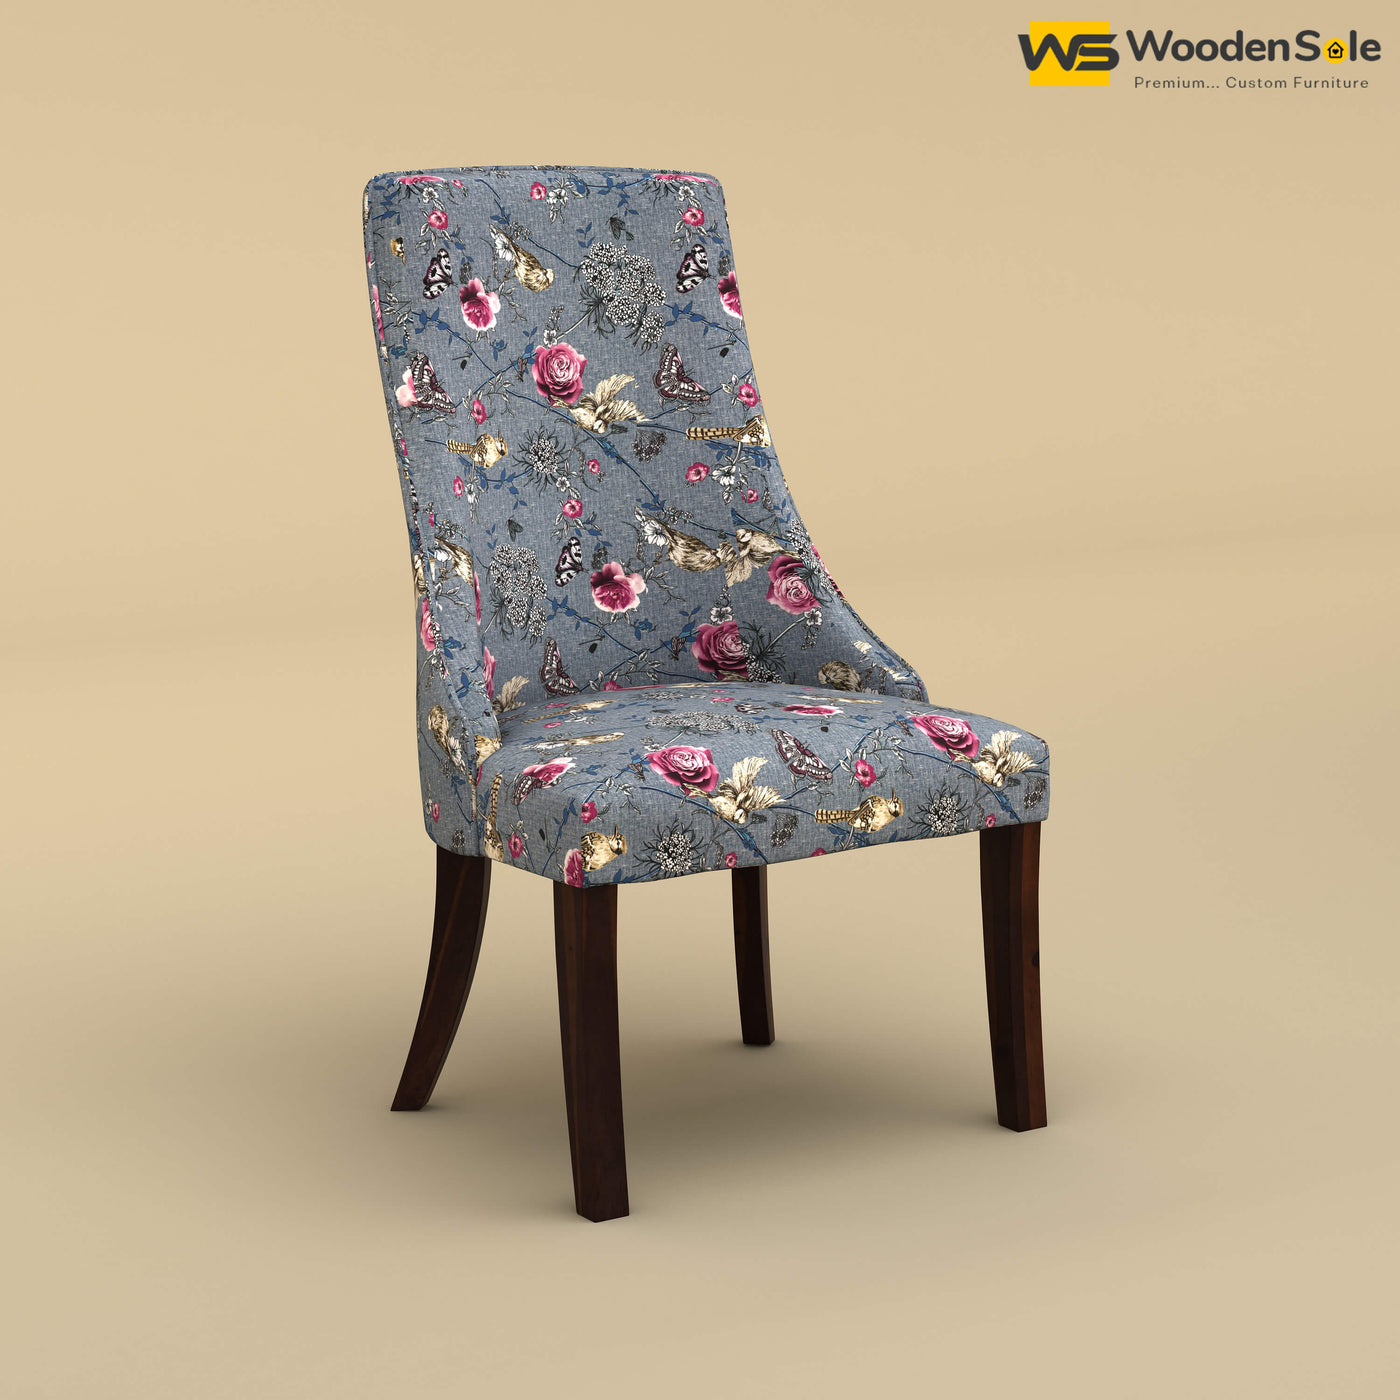 Dublin Dining Chair (Cotton, Floral Printed)